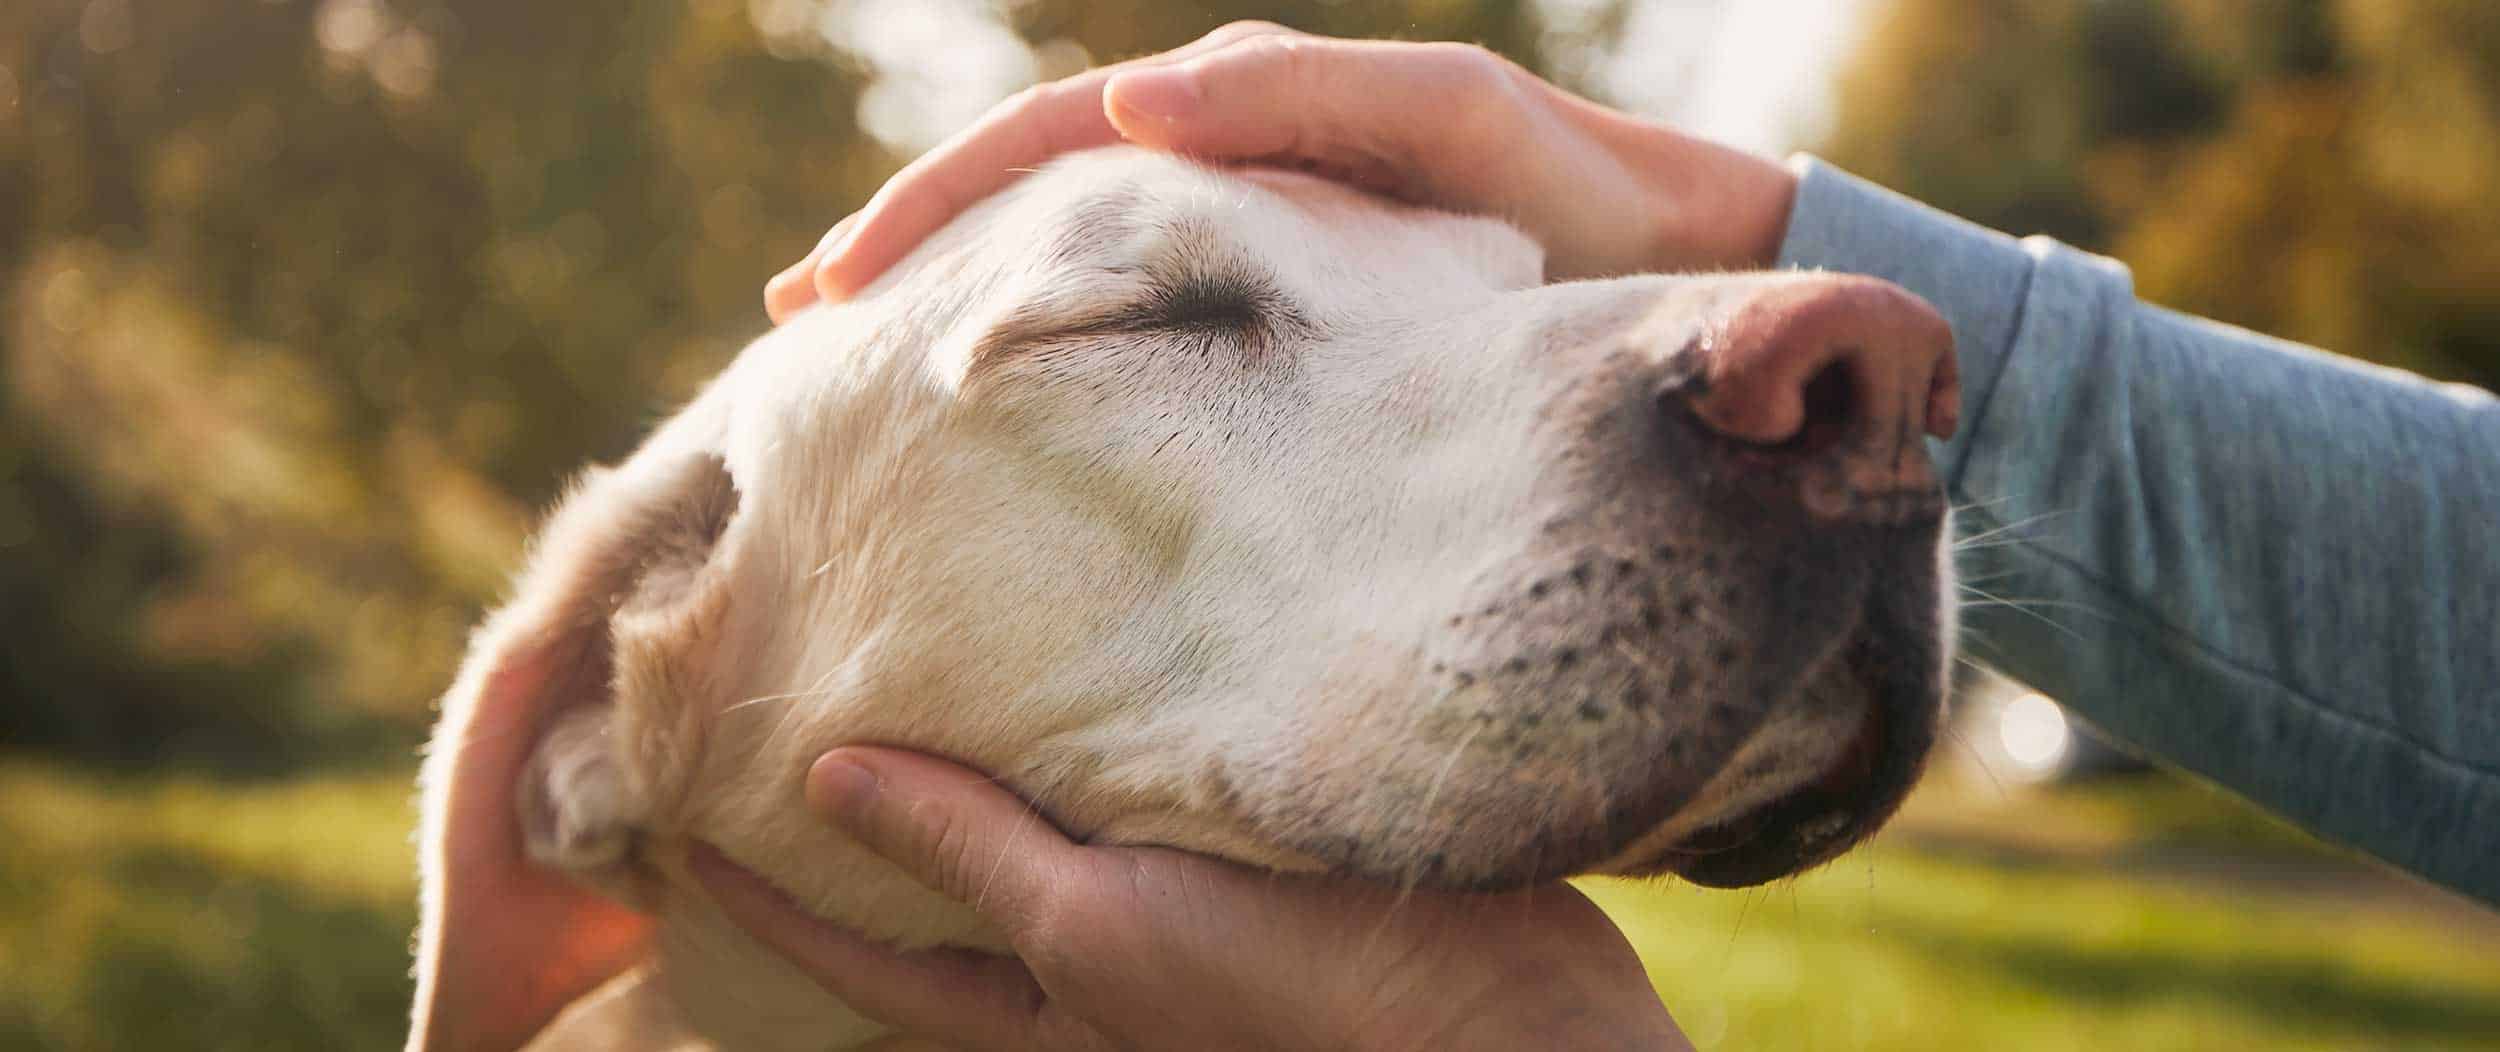 A large dog being petted